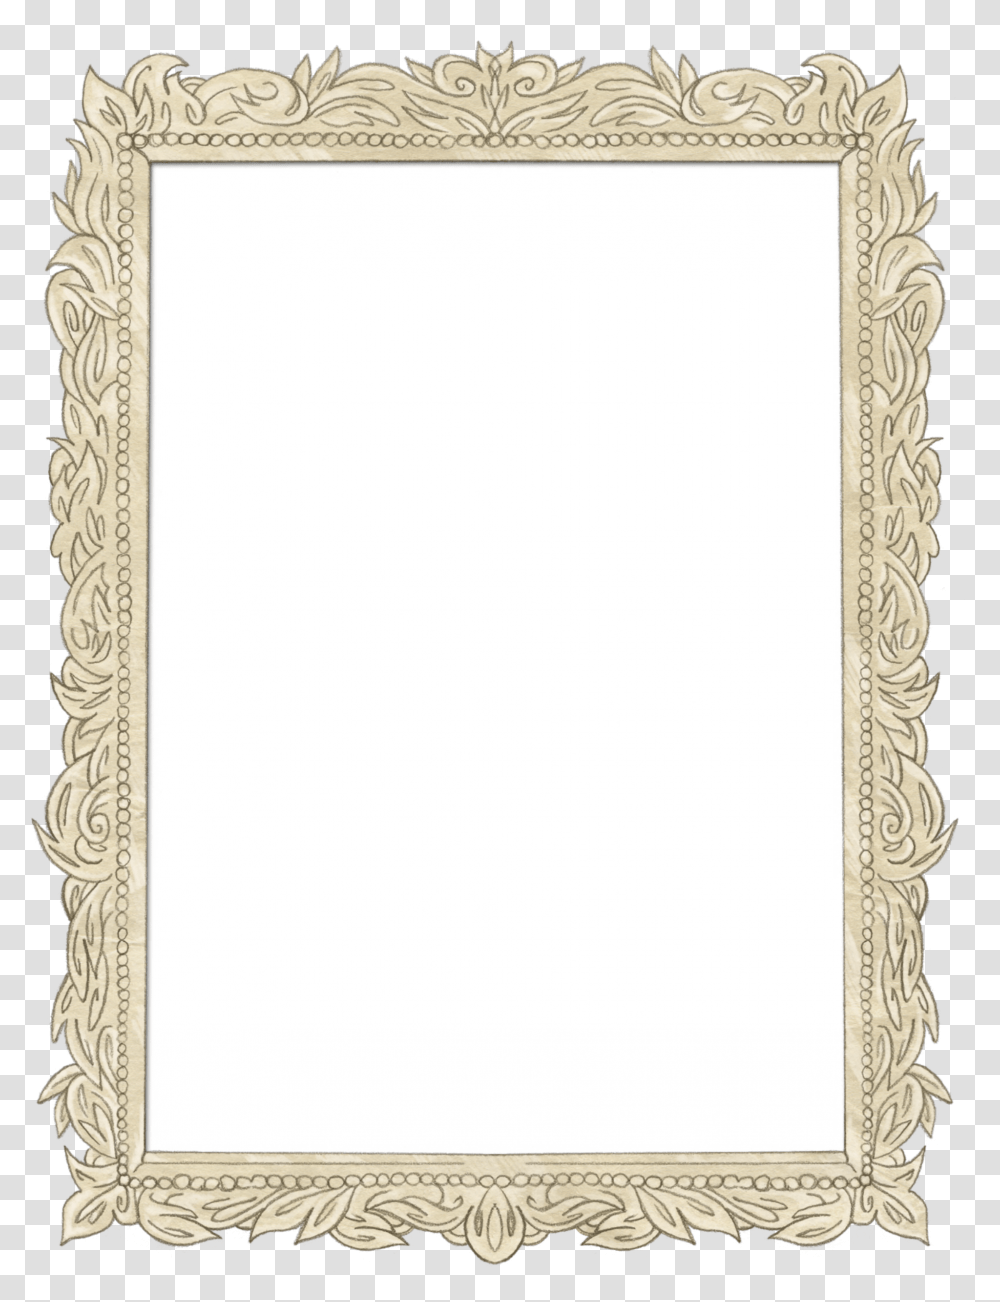 Snappygoatcom Free Public Domain Images Snappygoatcom Picture Frame, Rug, Mirror Transparent Png